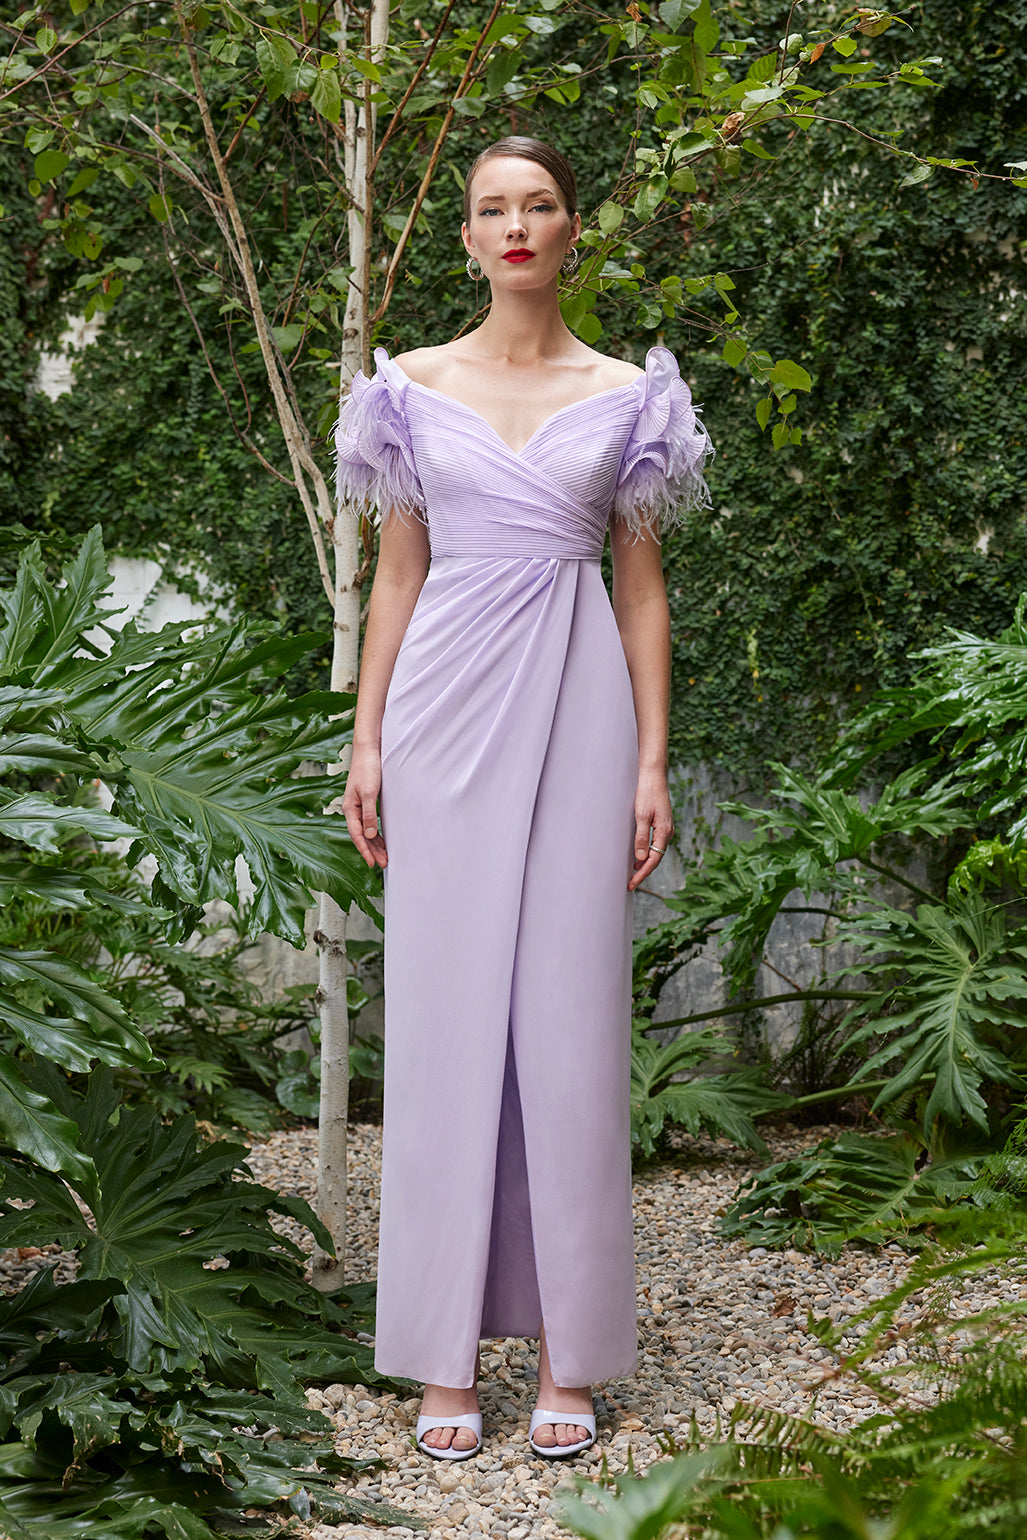 Model presenting a lilac evening gown (offered in dark fuchsia and turquoise as well) with feathered shoulders and a thigh-high slit, posing in a lush garden.